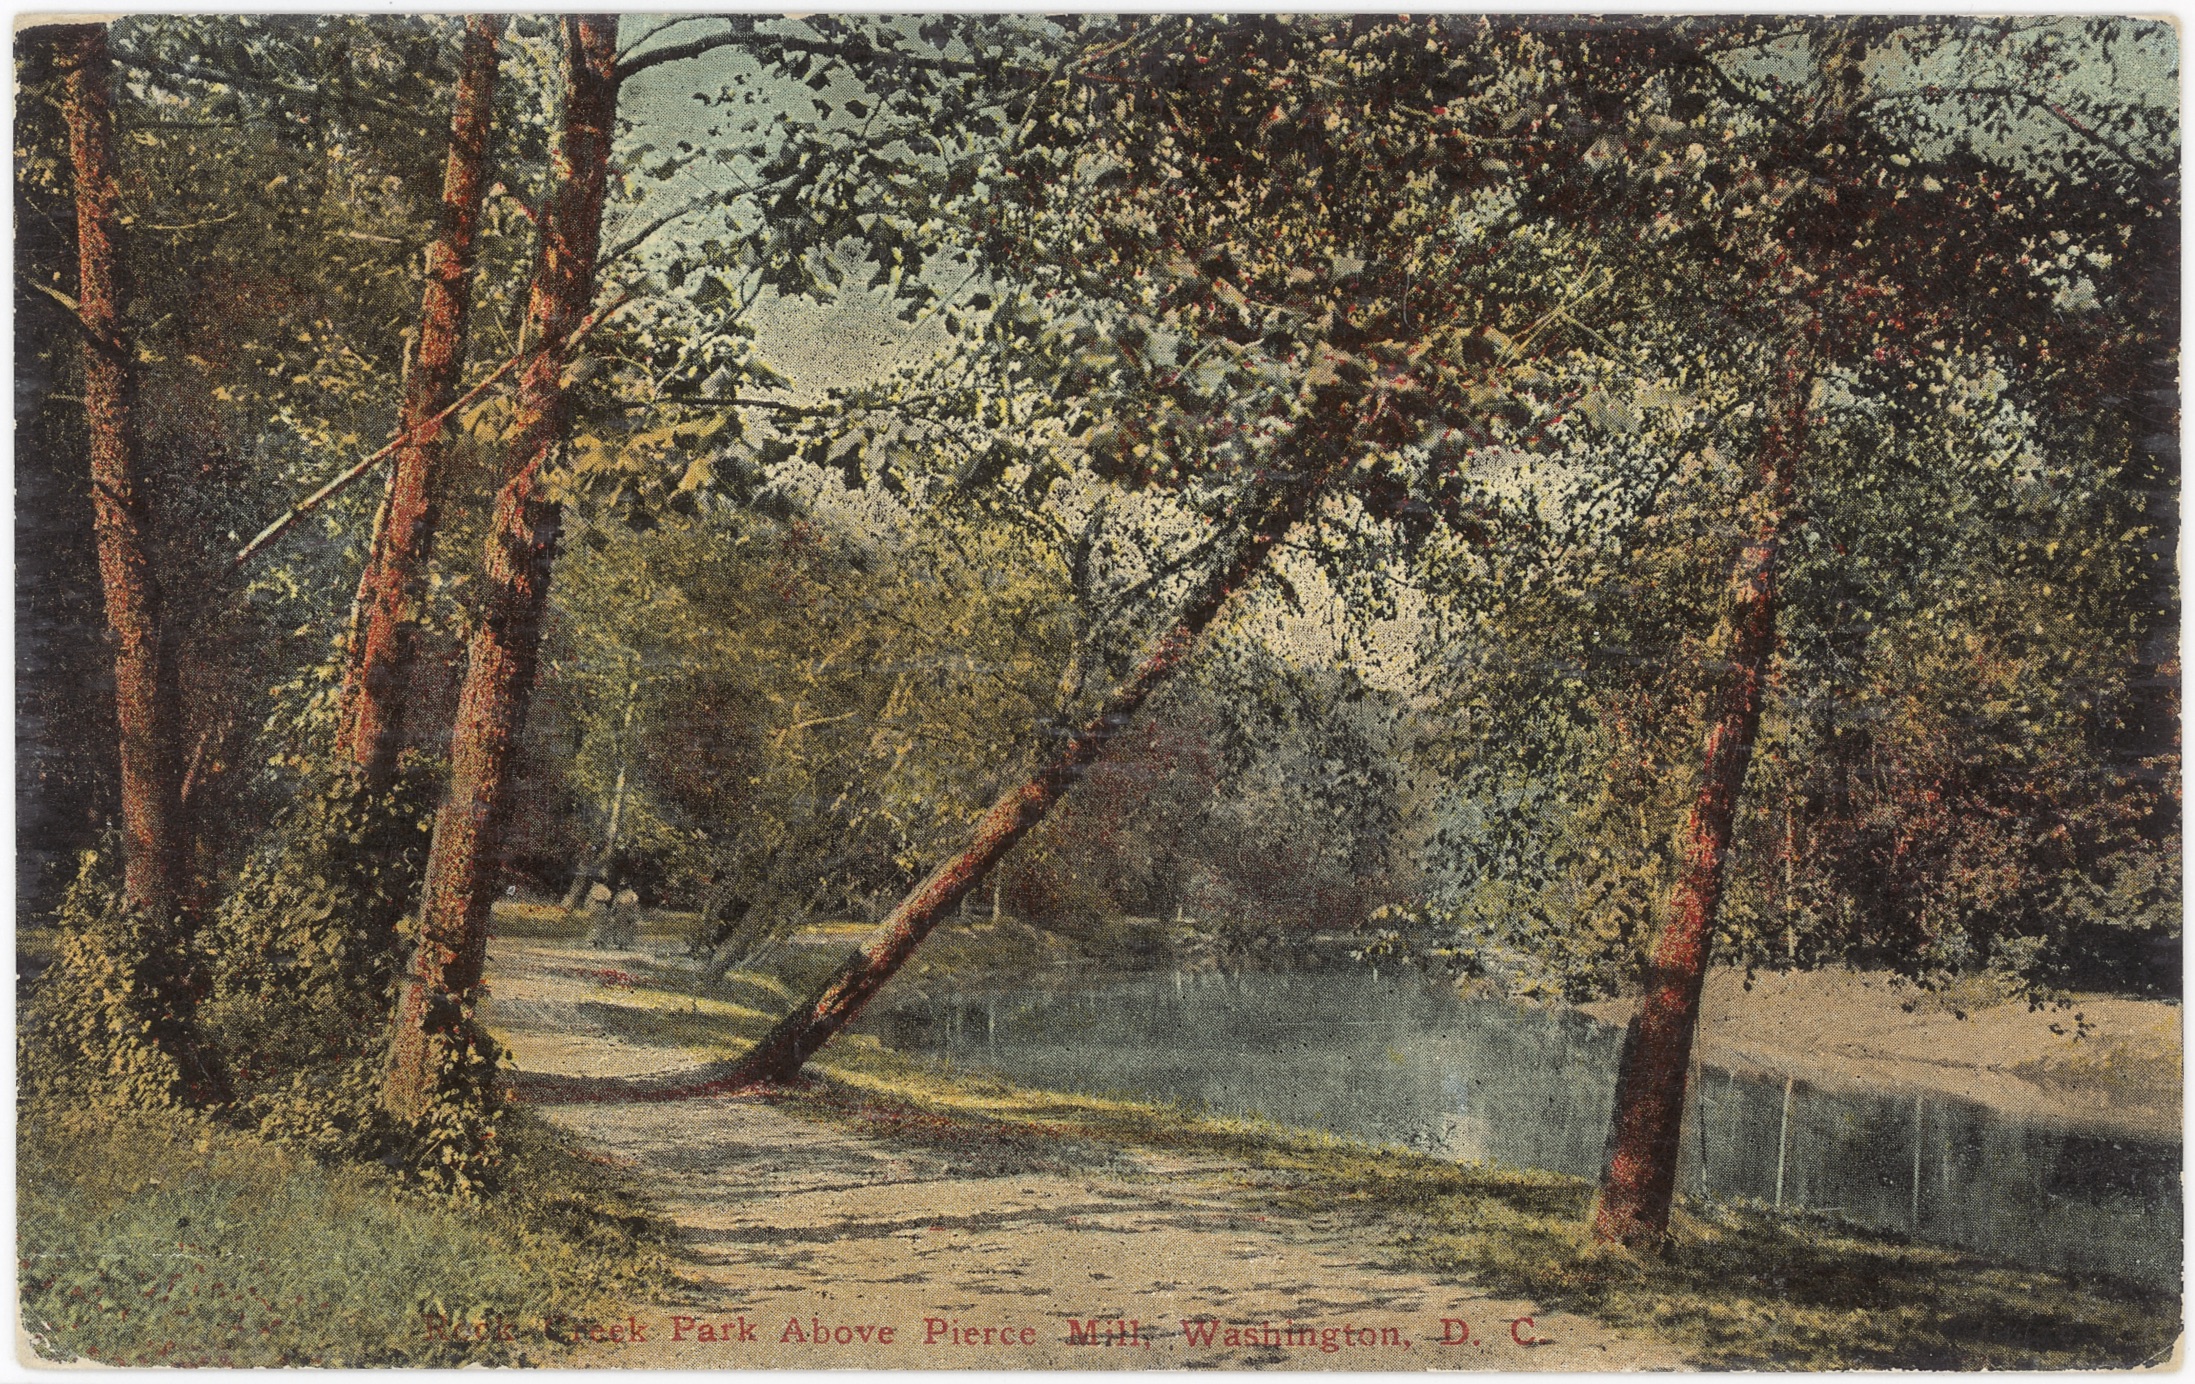 Colorful old postcard of a path along a tree-lined creek.